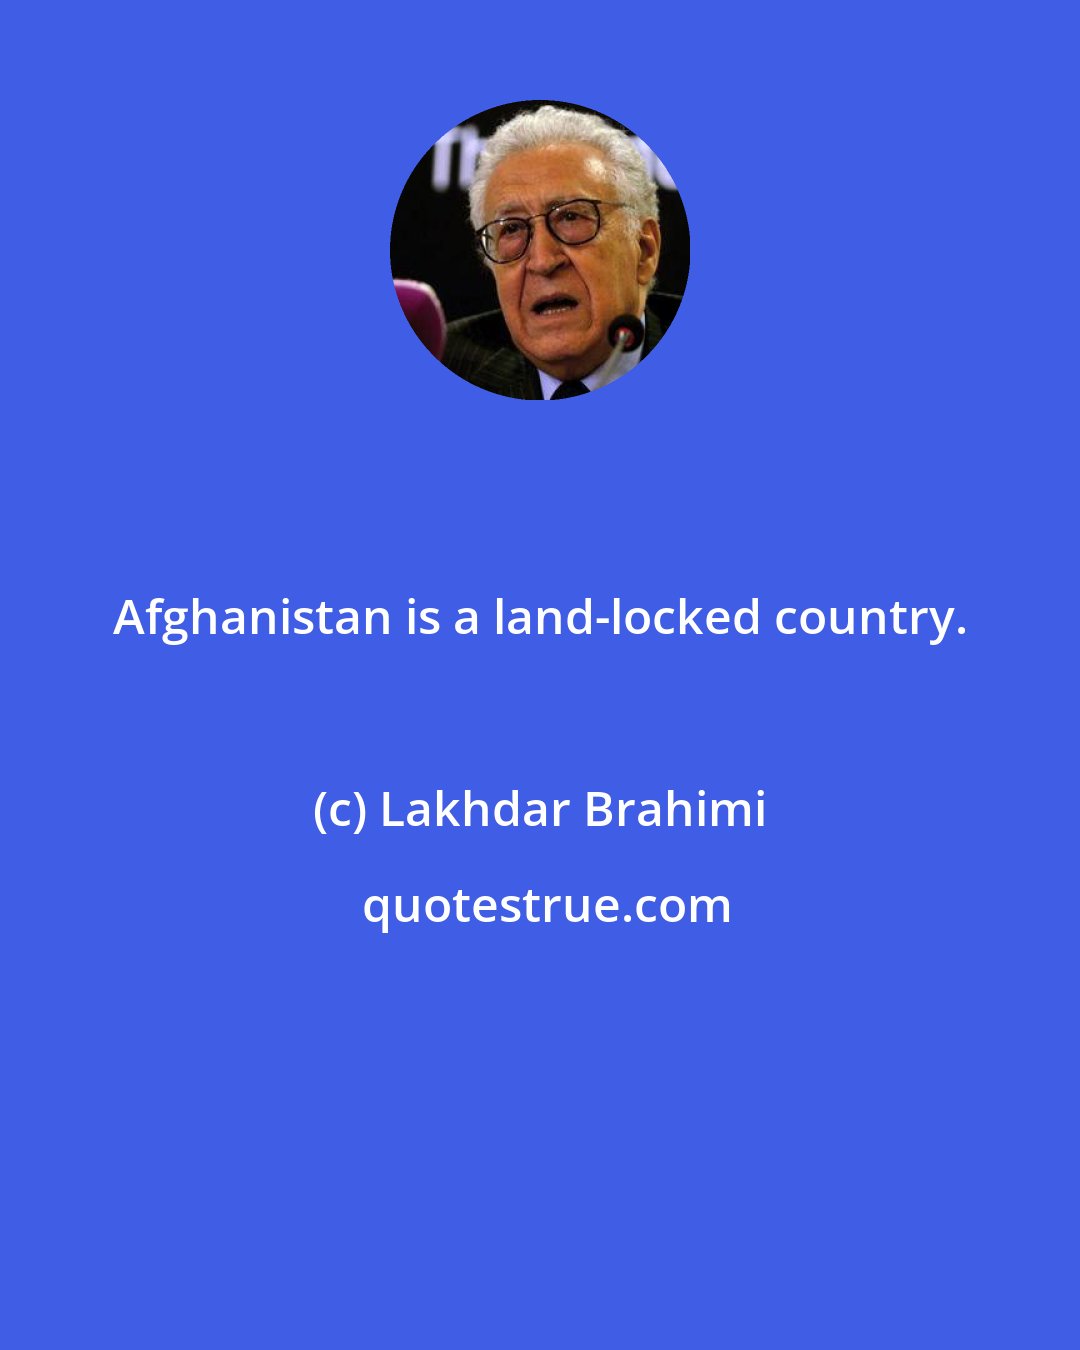 Lakhdar Brahimi: Afghanistan is a land-locked country.